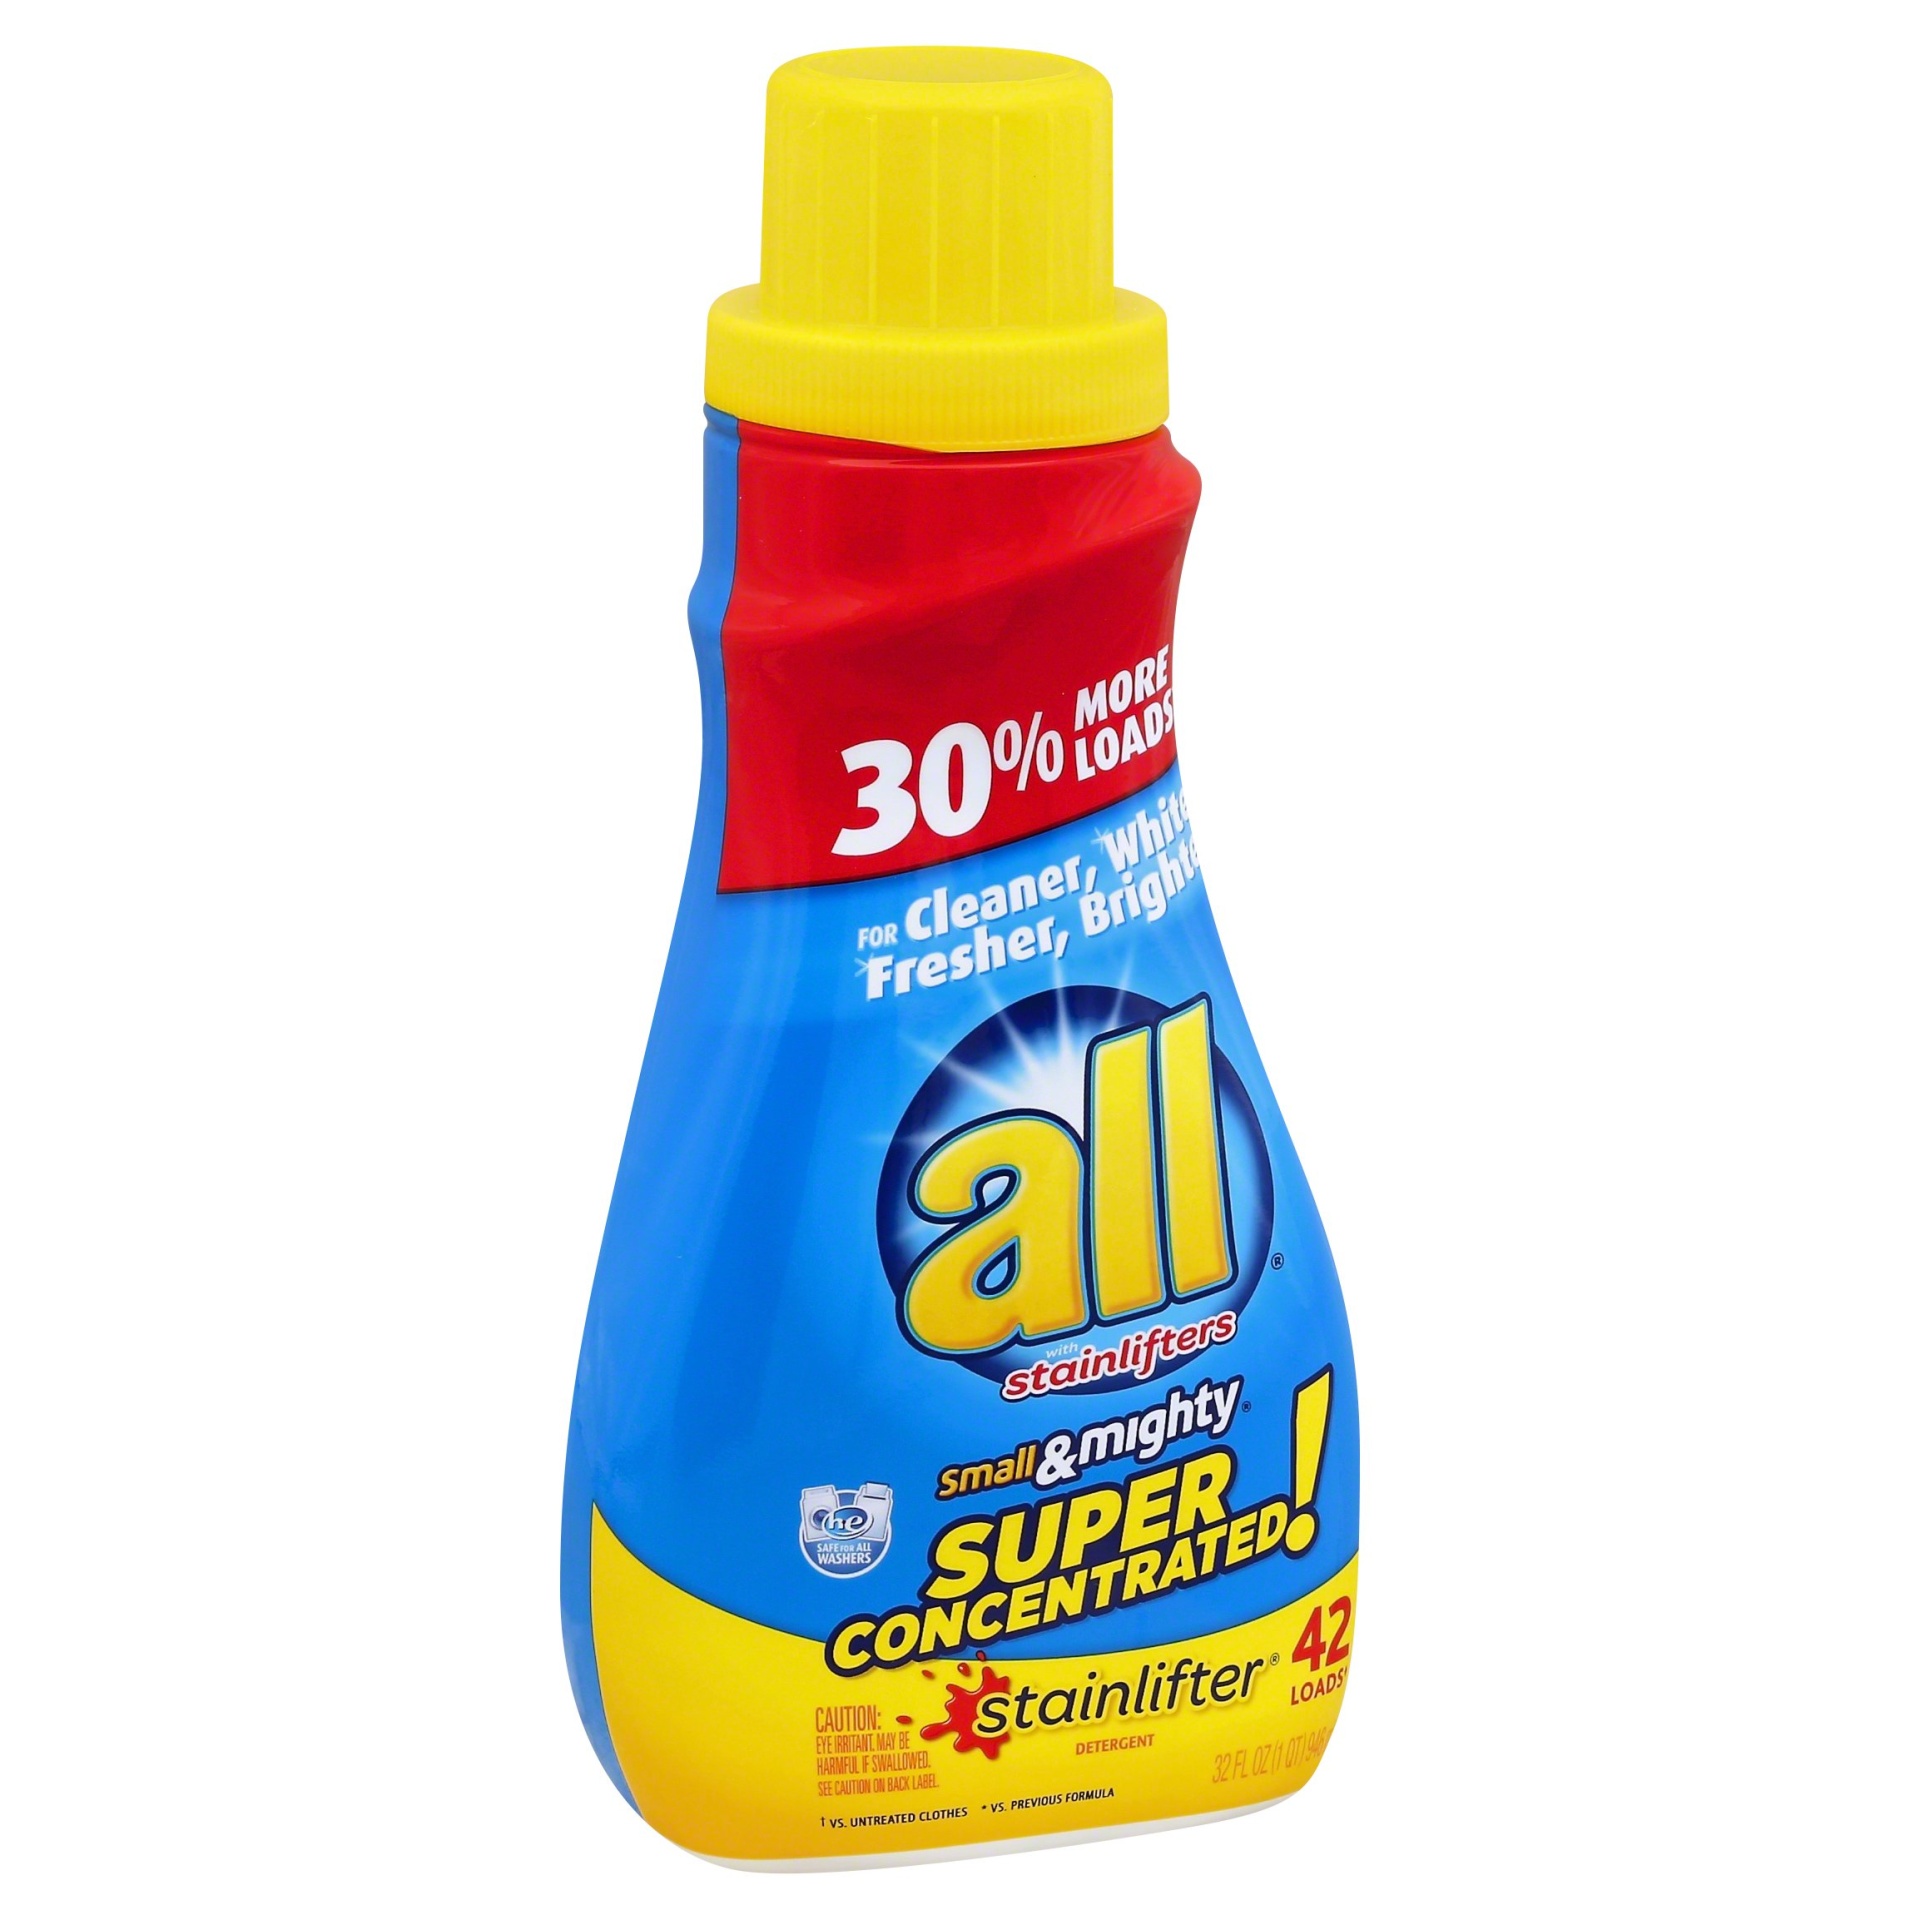 slide 1 of 1, All smAll & mighty stainlifter Laundry Detergent 42 Loads, 32 fl oz